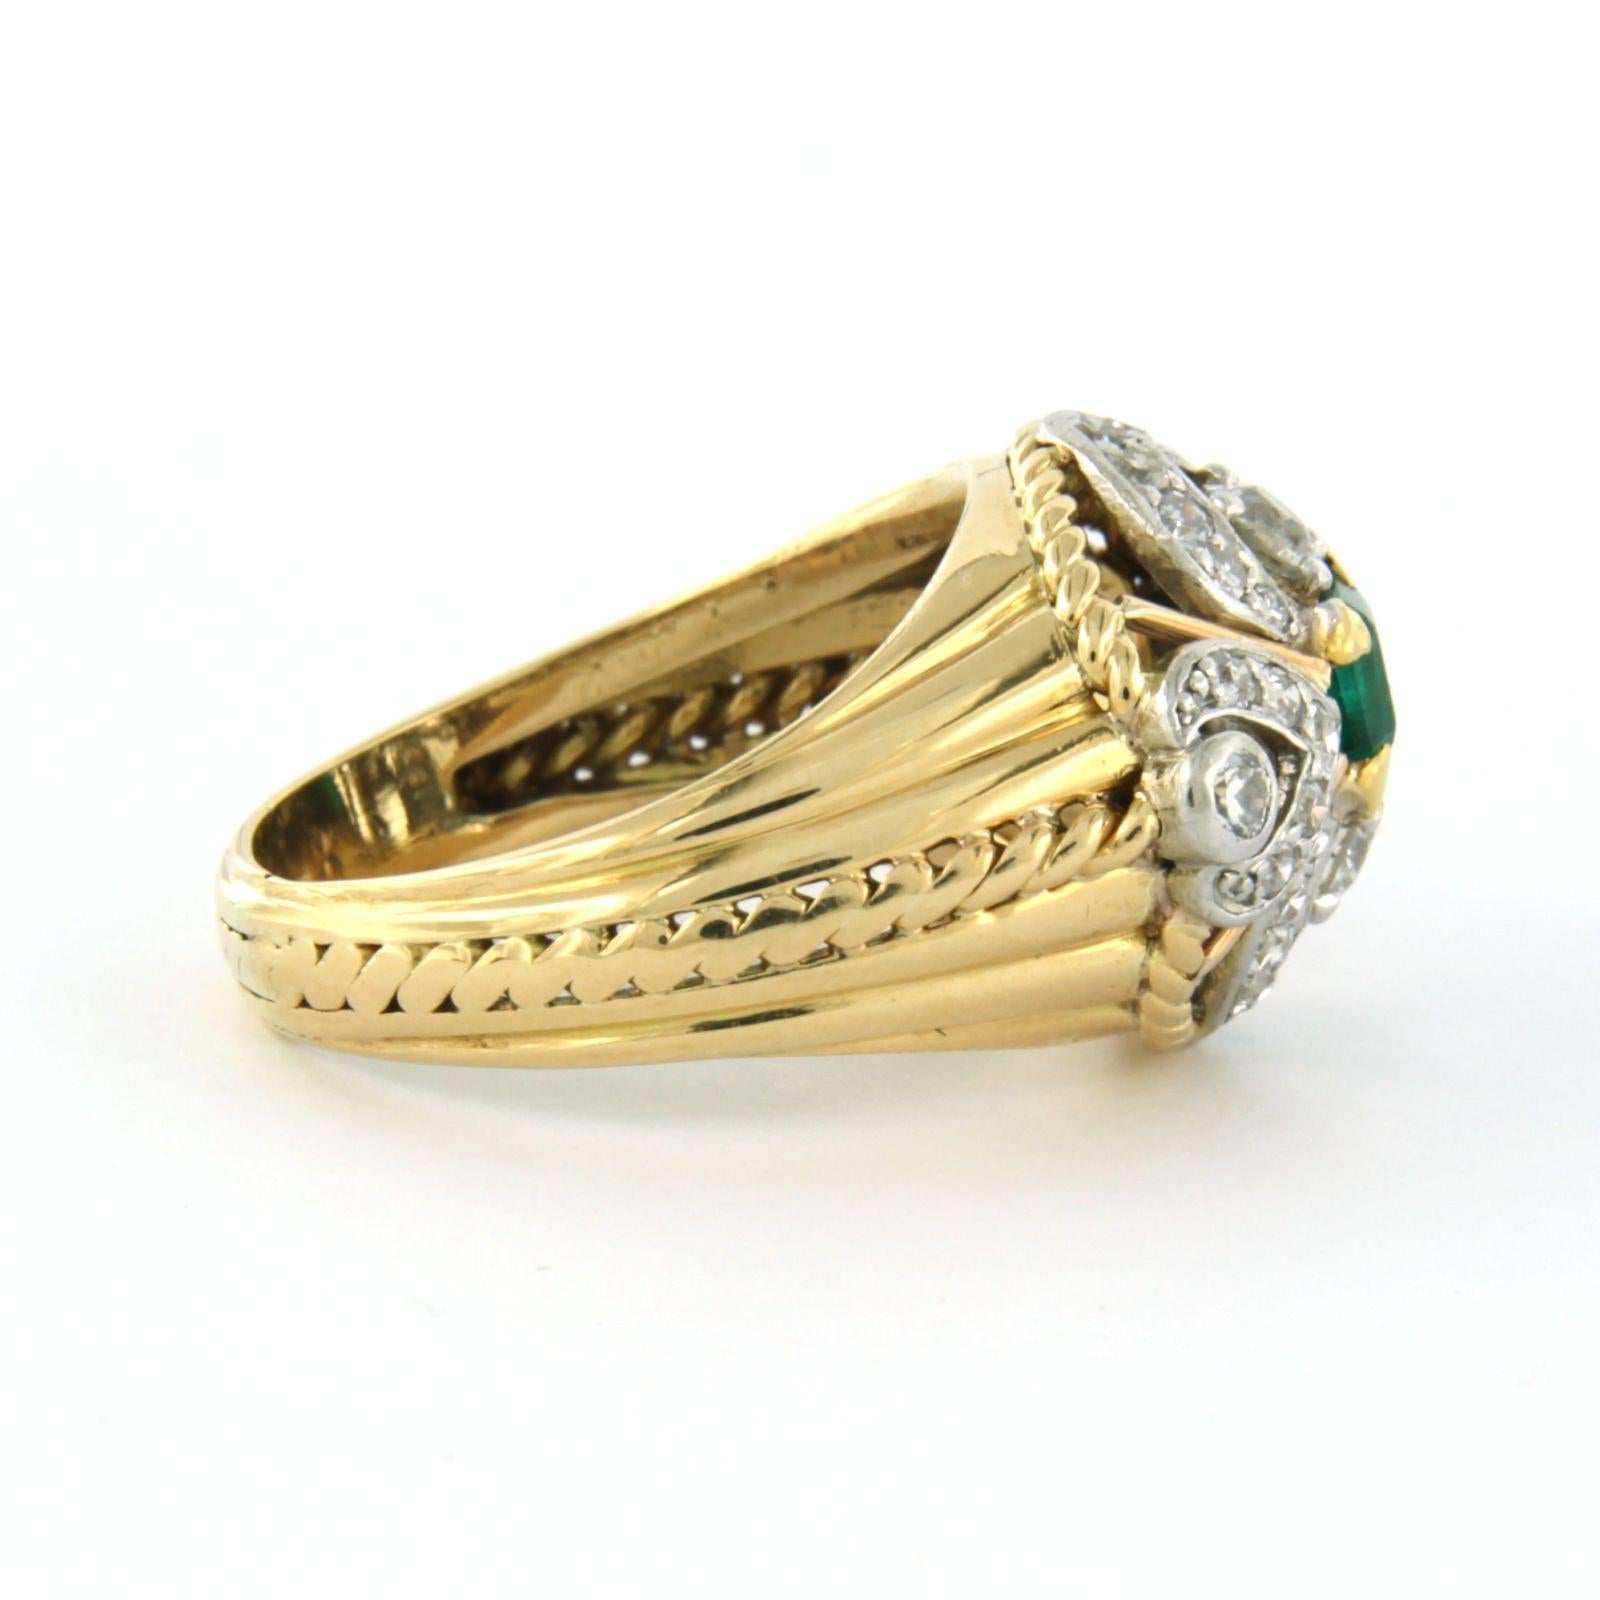 ART NOUVEAU ring set with emerald and diamond 18k bicolor gold For Sale 1